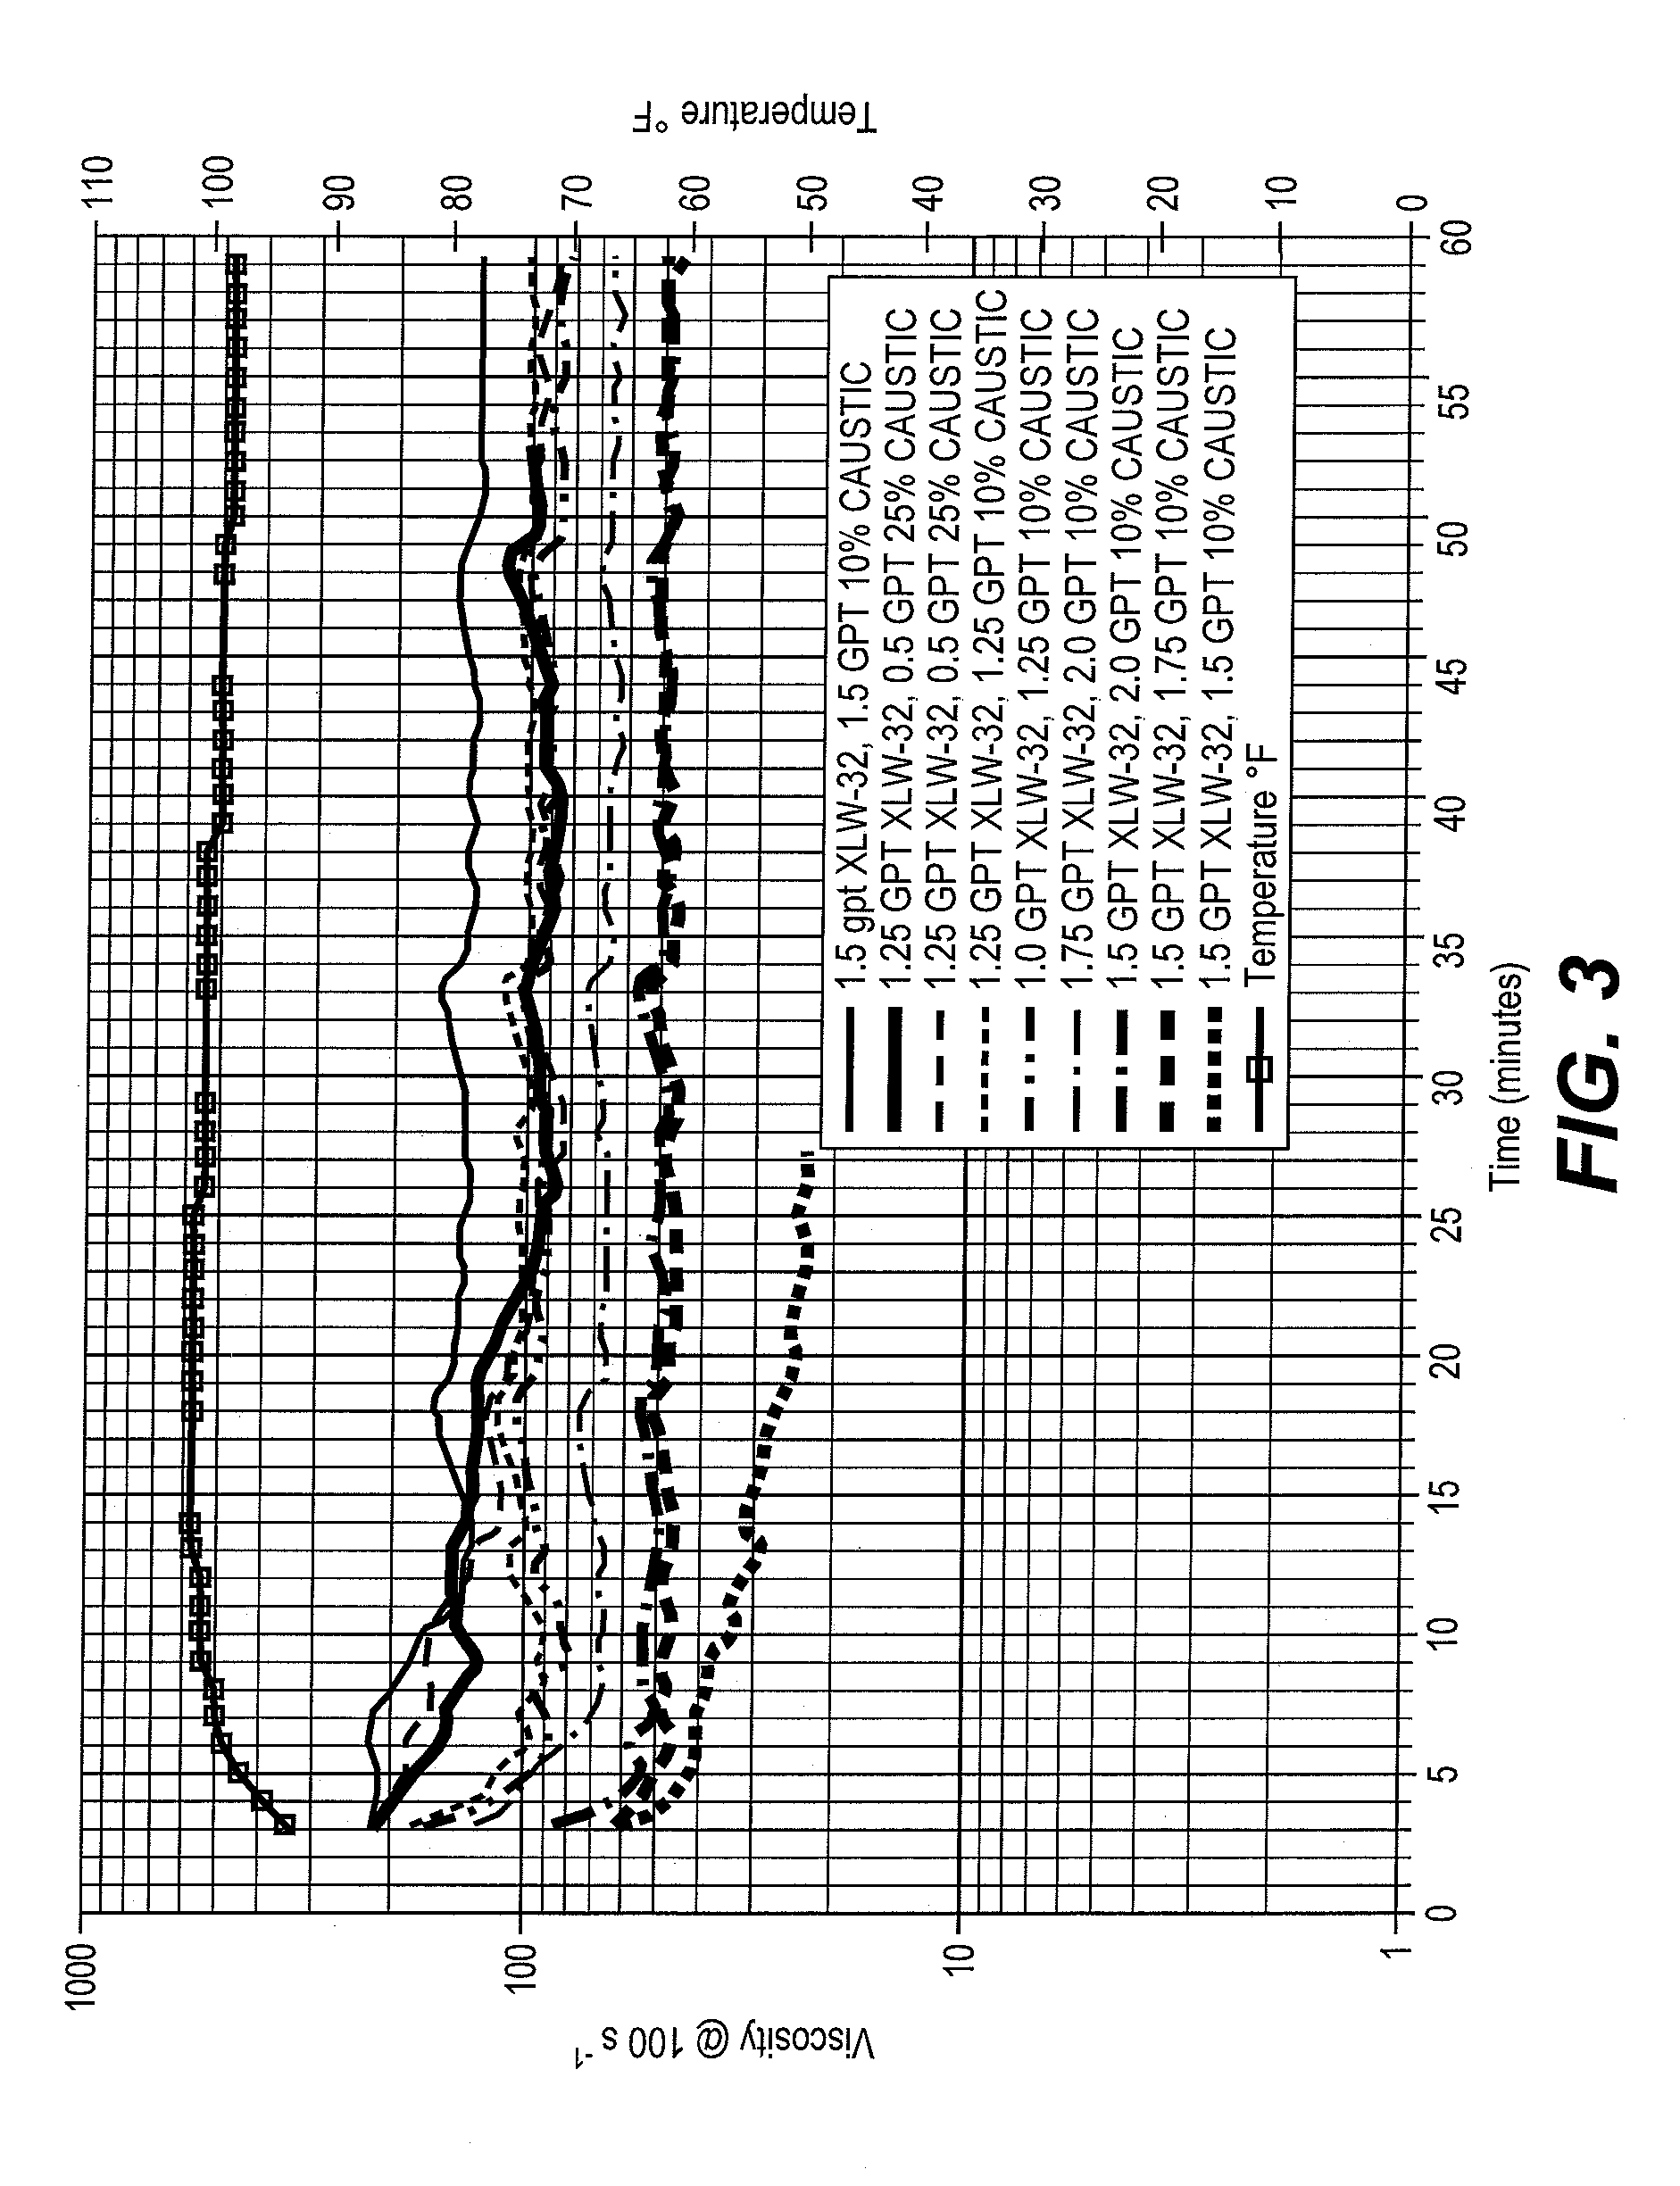 Method of fracturing subterranean formations with crosslinked fluid